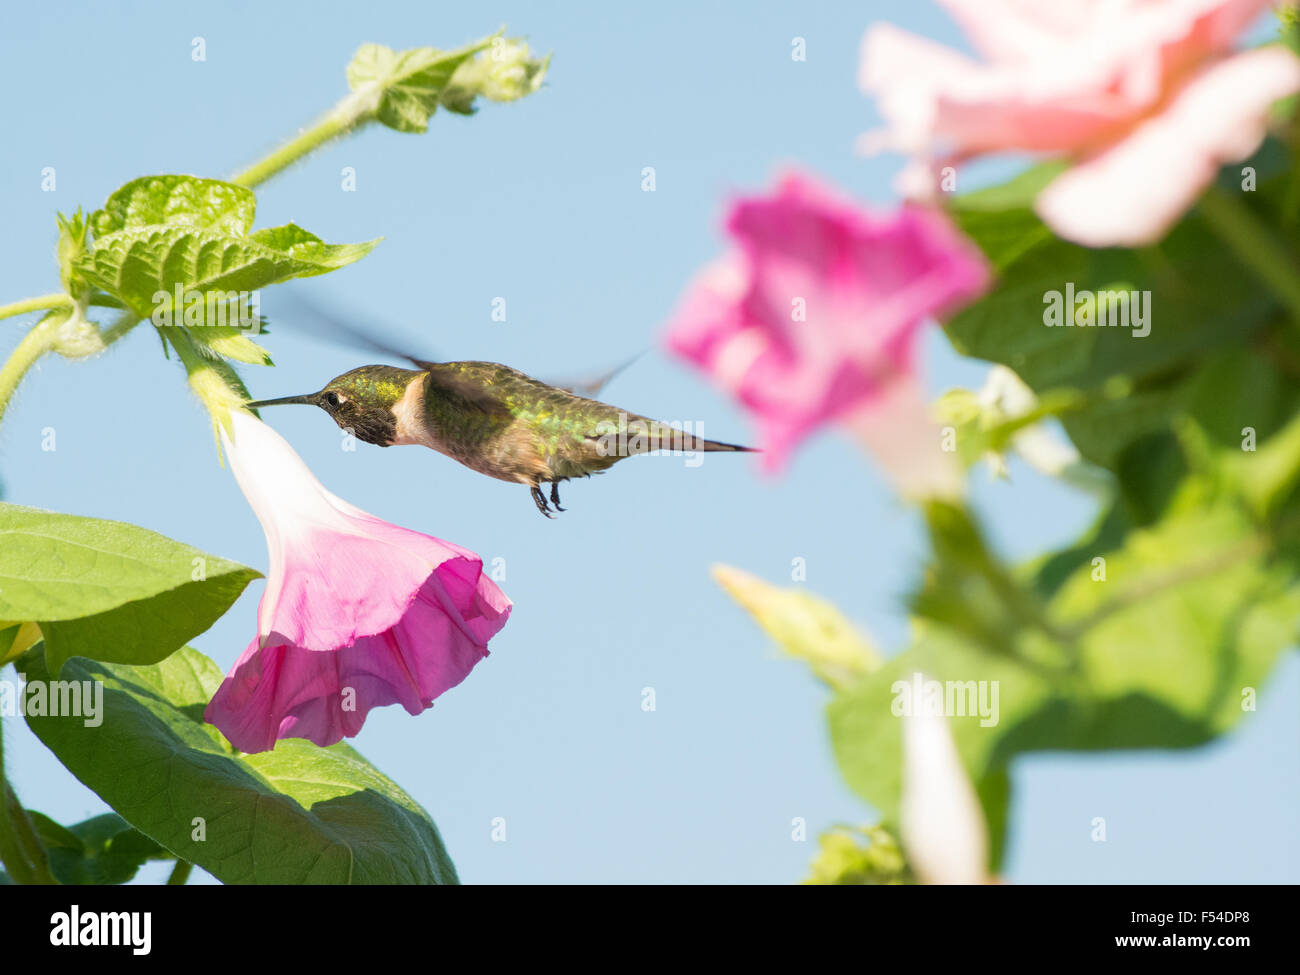 Male Hummingbird looking for nectar in a Morning Glory flower Stock Photo